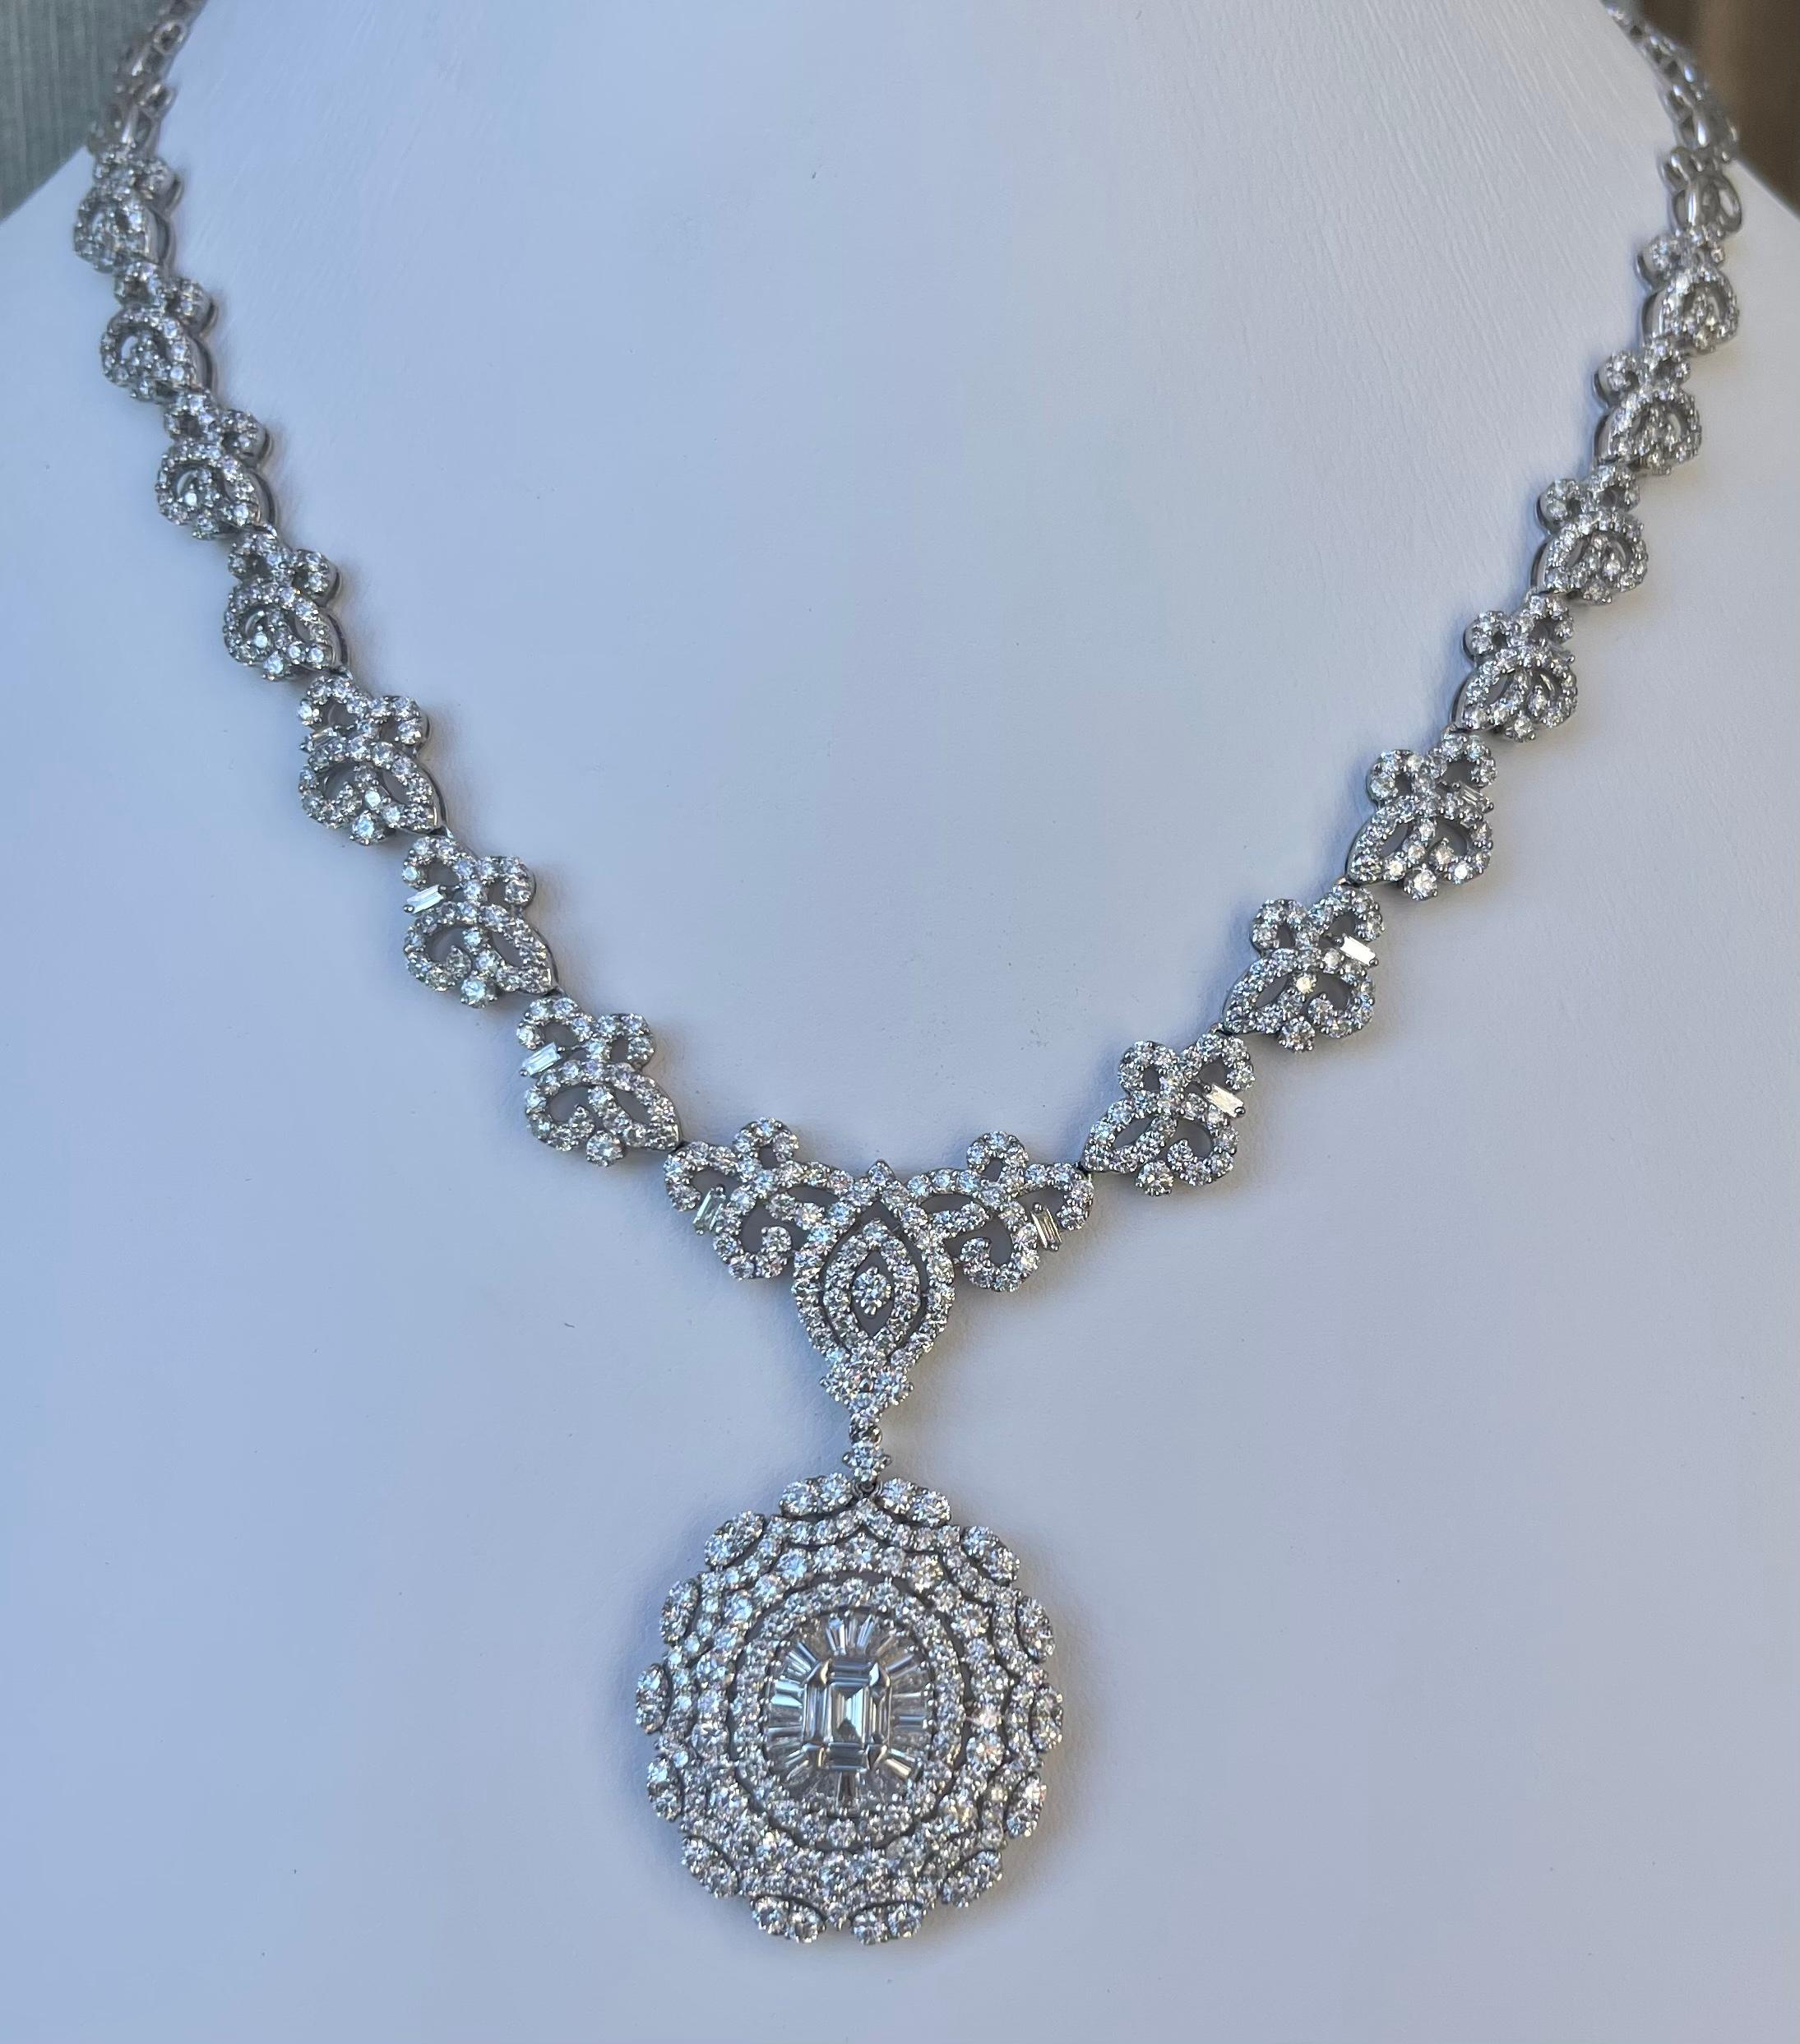 
Magnificent ladies 18 karat white gold diamond medallion pendant necklace.   The oval shaped diamond medallion pendant hangs from a connected 16” long diamond chain with a fancy repetitive pattern that is encrusted in diamonds halfway up the